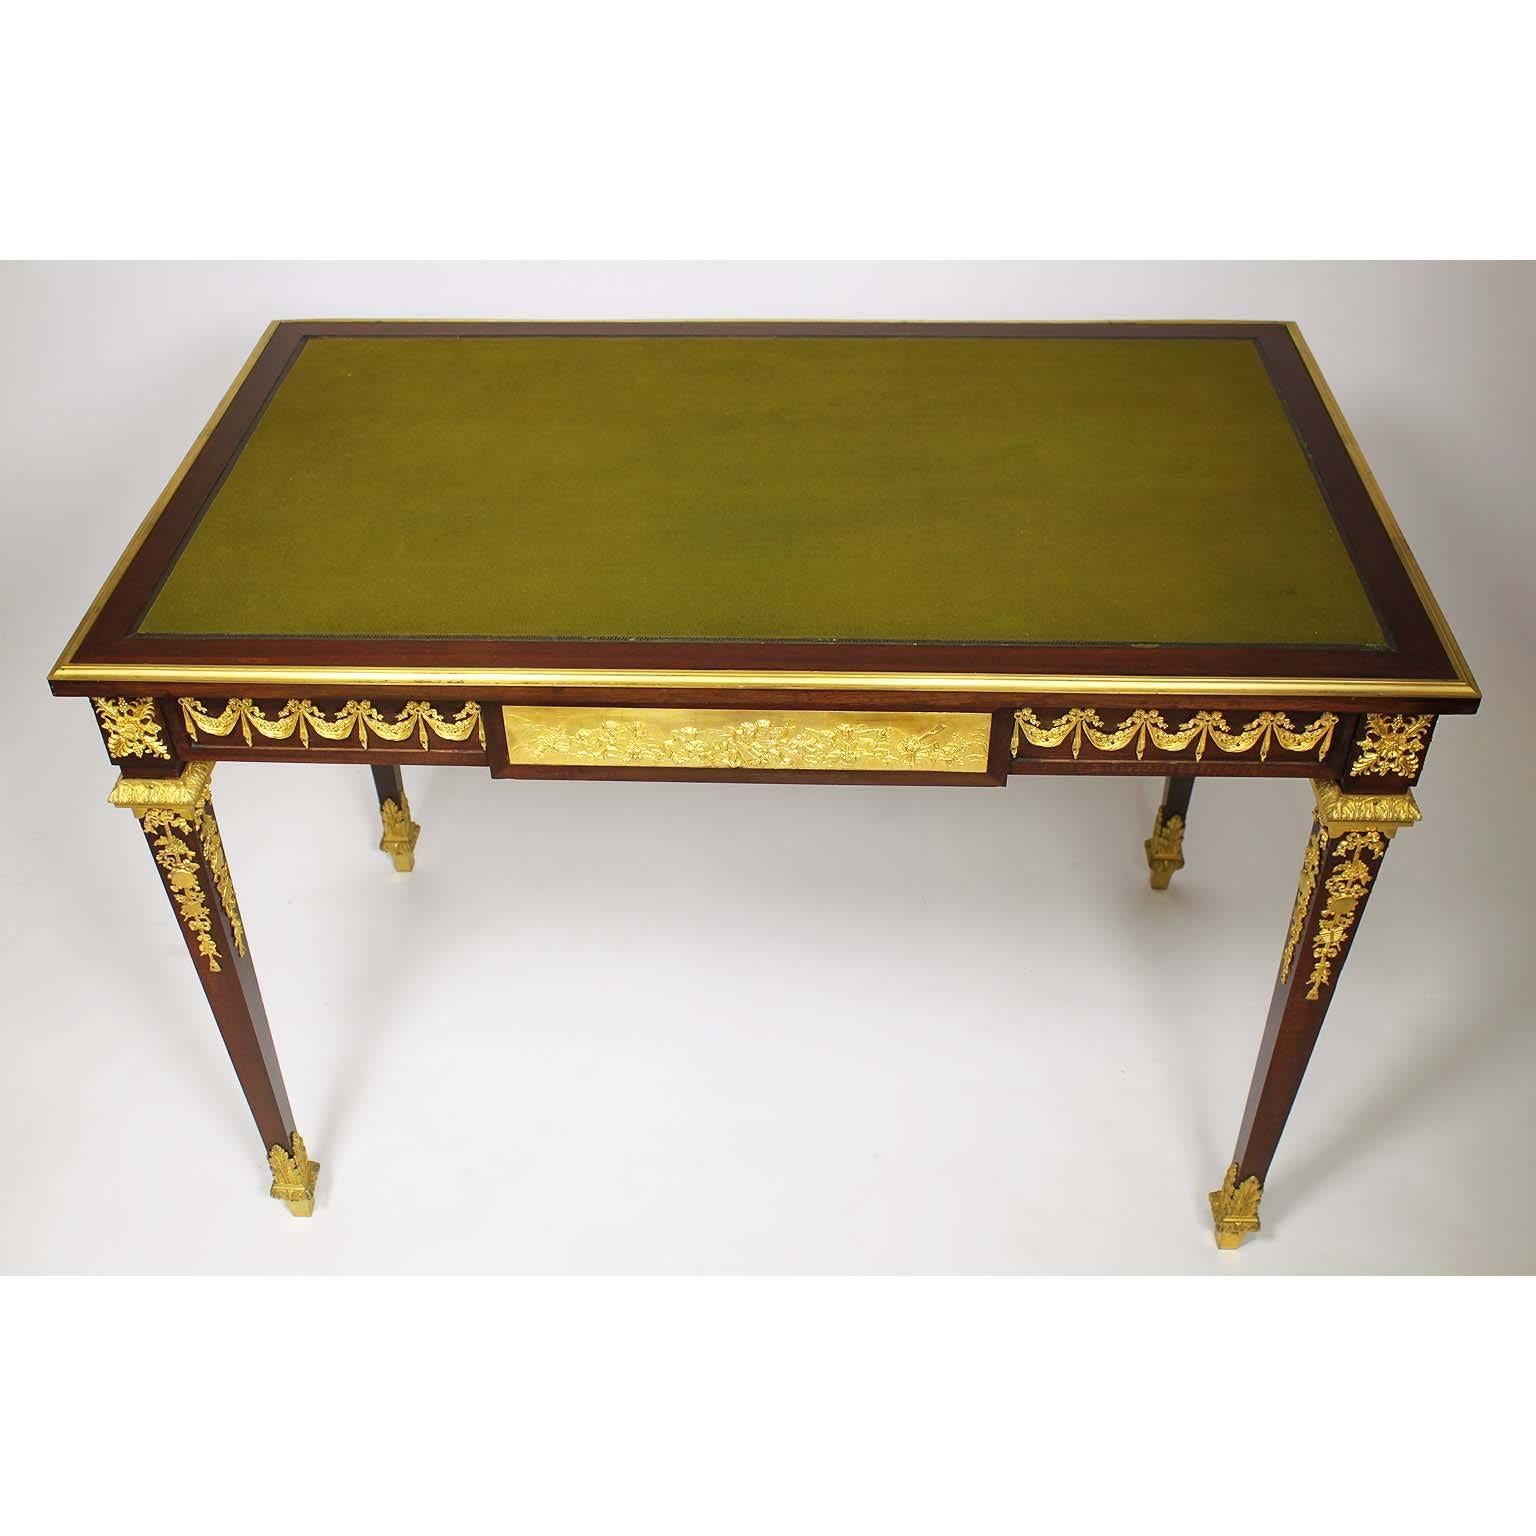 Carved French 19th Century Louis XVI Style Mahogany and Ormolu Mounted Desk by Grimard For Sale